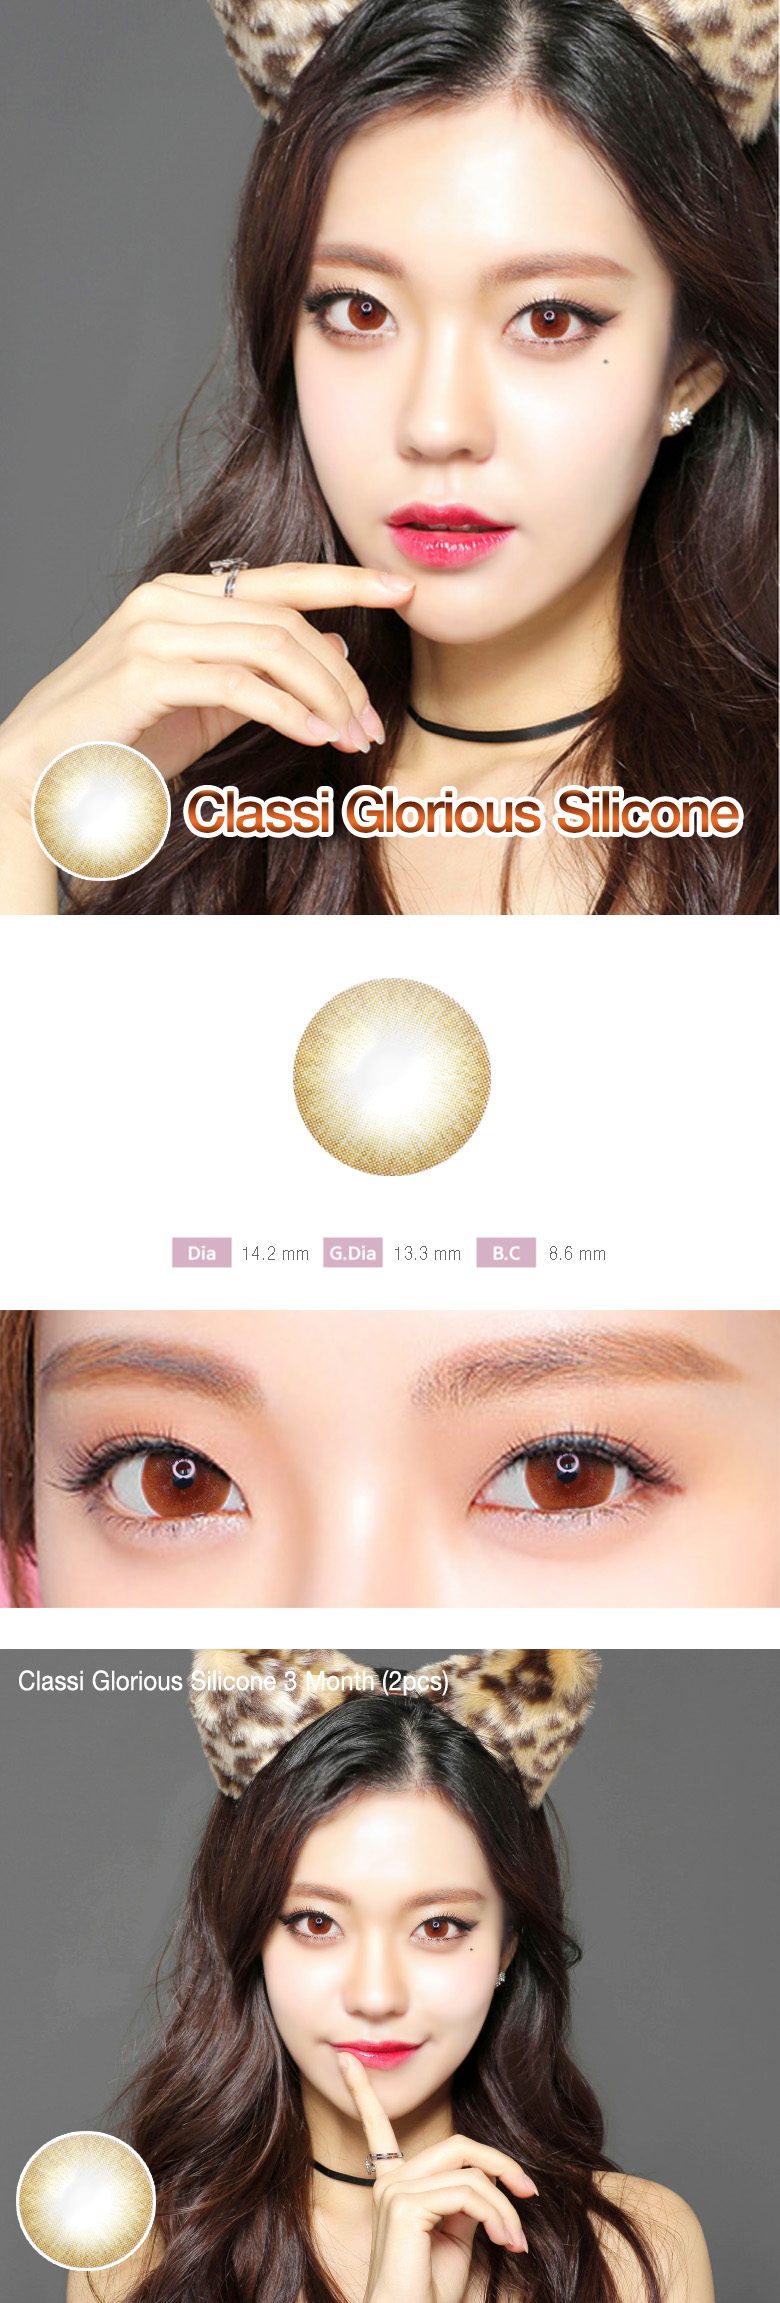 [3 Month/ブラウン/BROWN] クラシ グロリアス シリコン 3ヶ月 - Classi Glorious Silicone 3 Month (2pcs) [14.2mm]